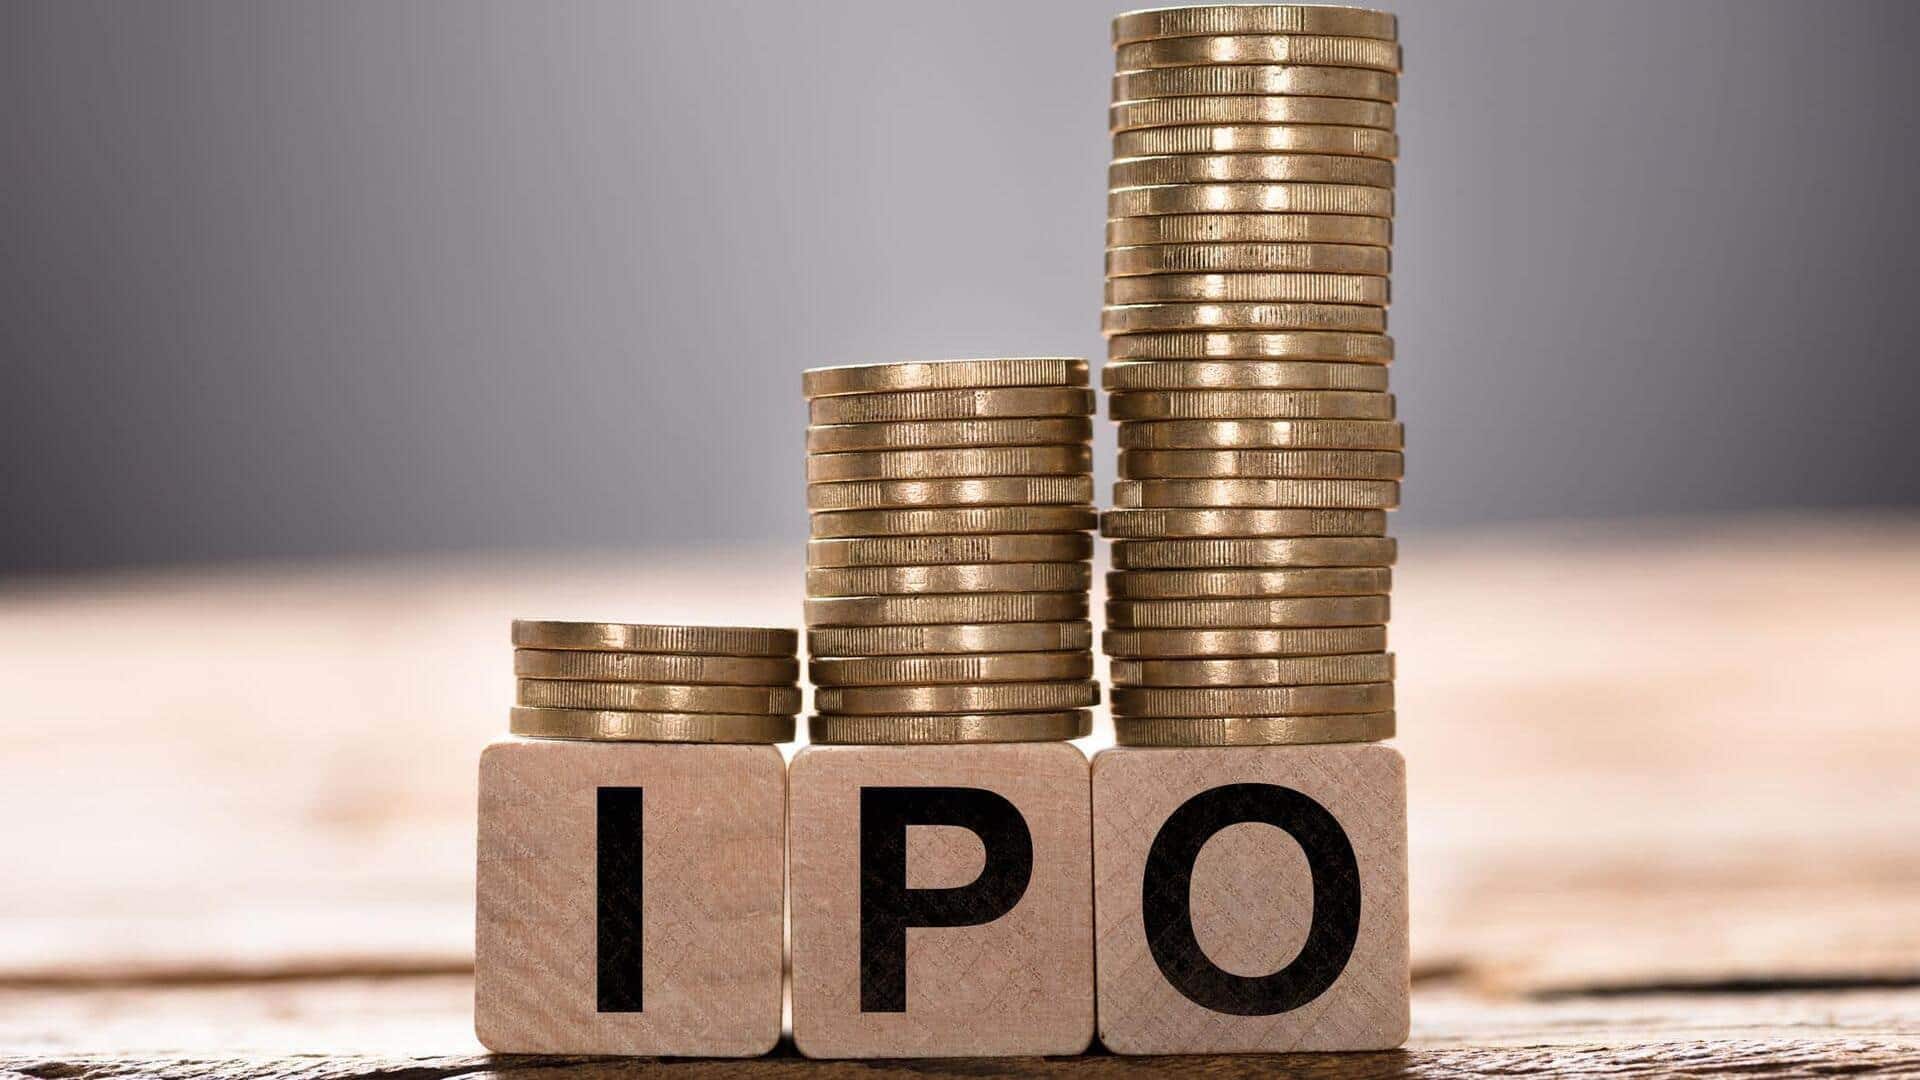 Niva Bupa Health Insurance files papers for ₹3,000 crore IPO